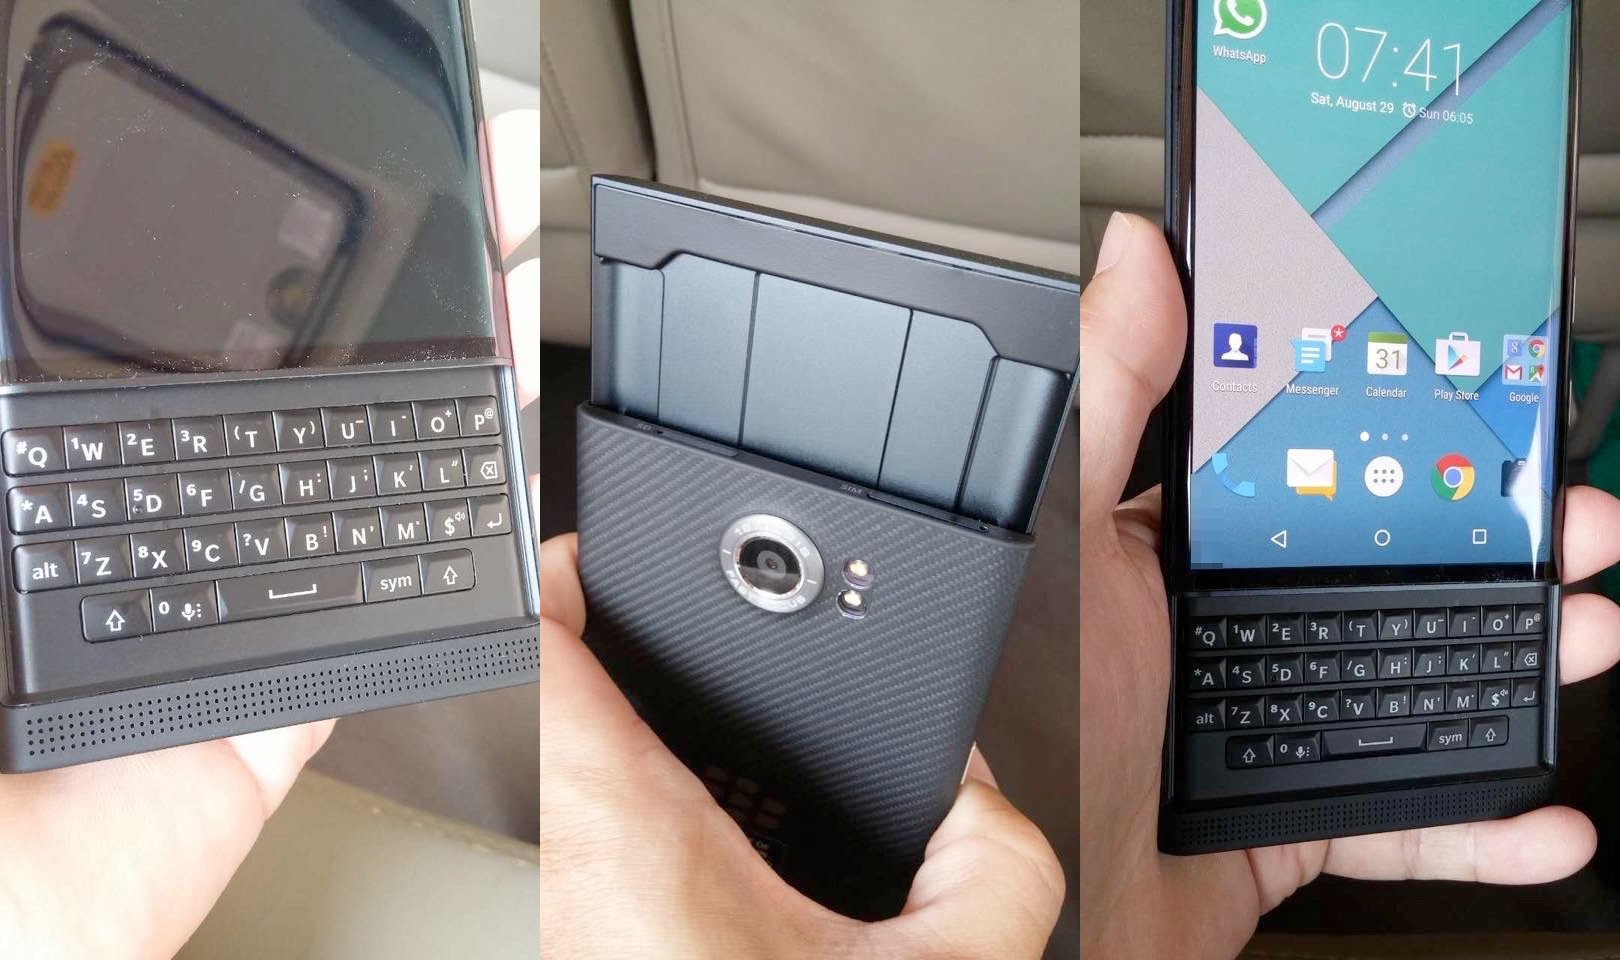 BlackBerry Venice, leaked yet again" class="image-large